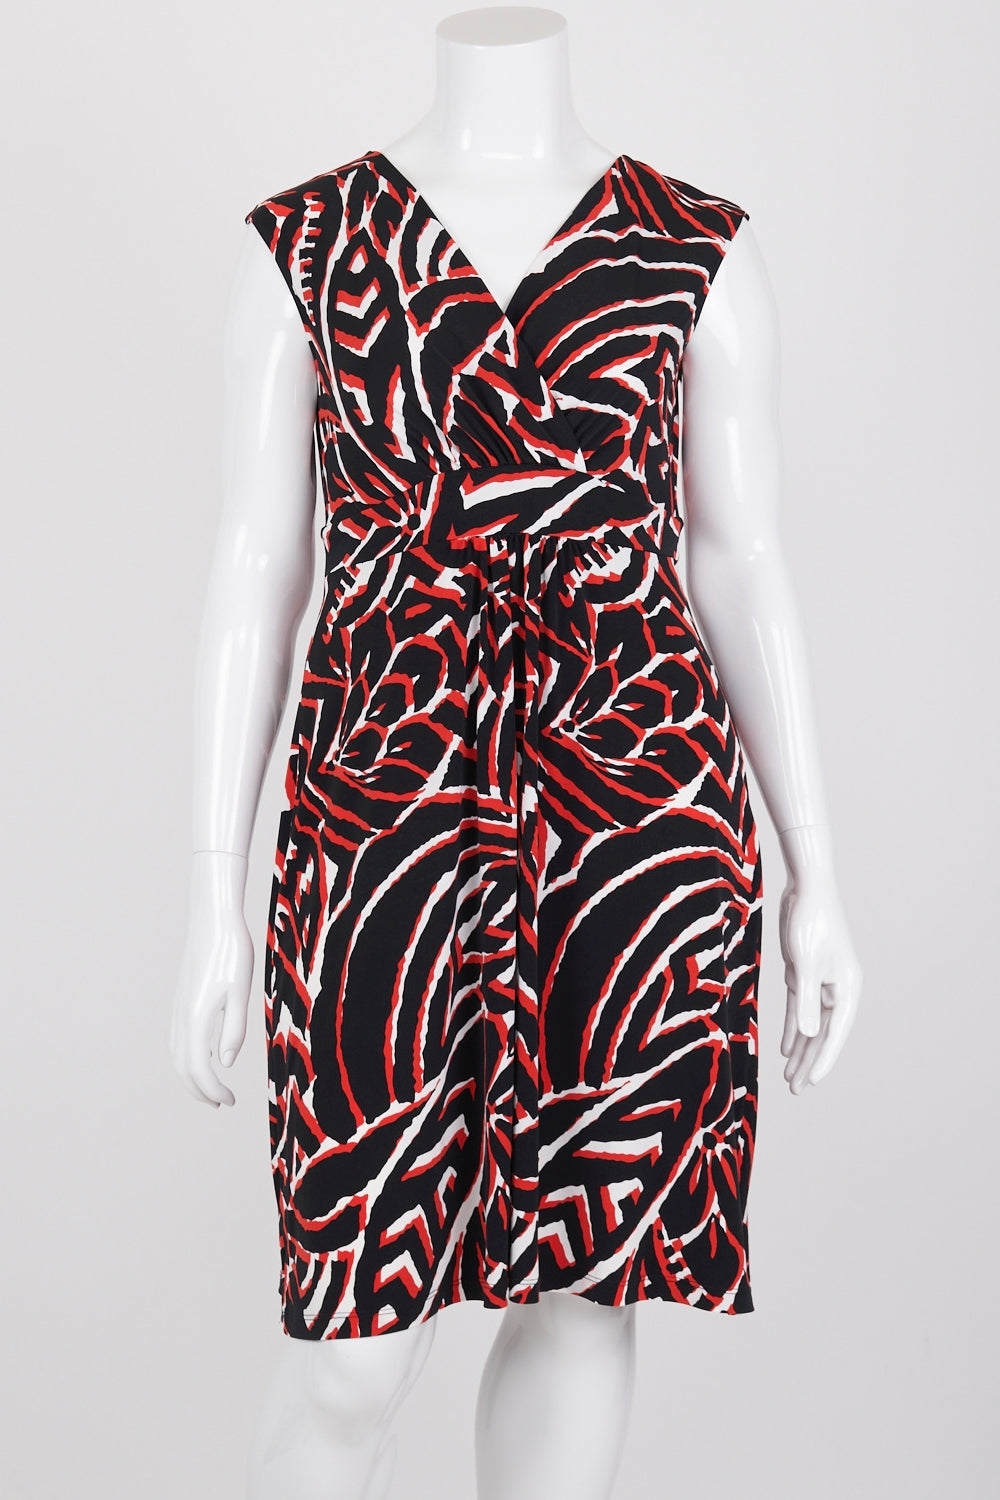 Basque Red, Black and White Patterned Sleeveless Dress 14